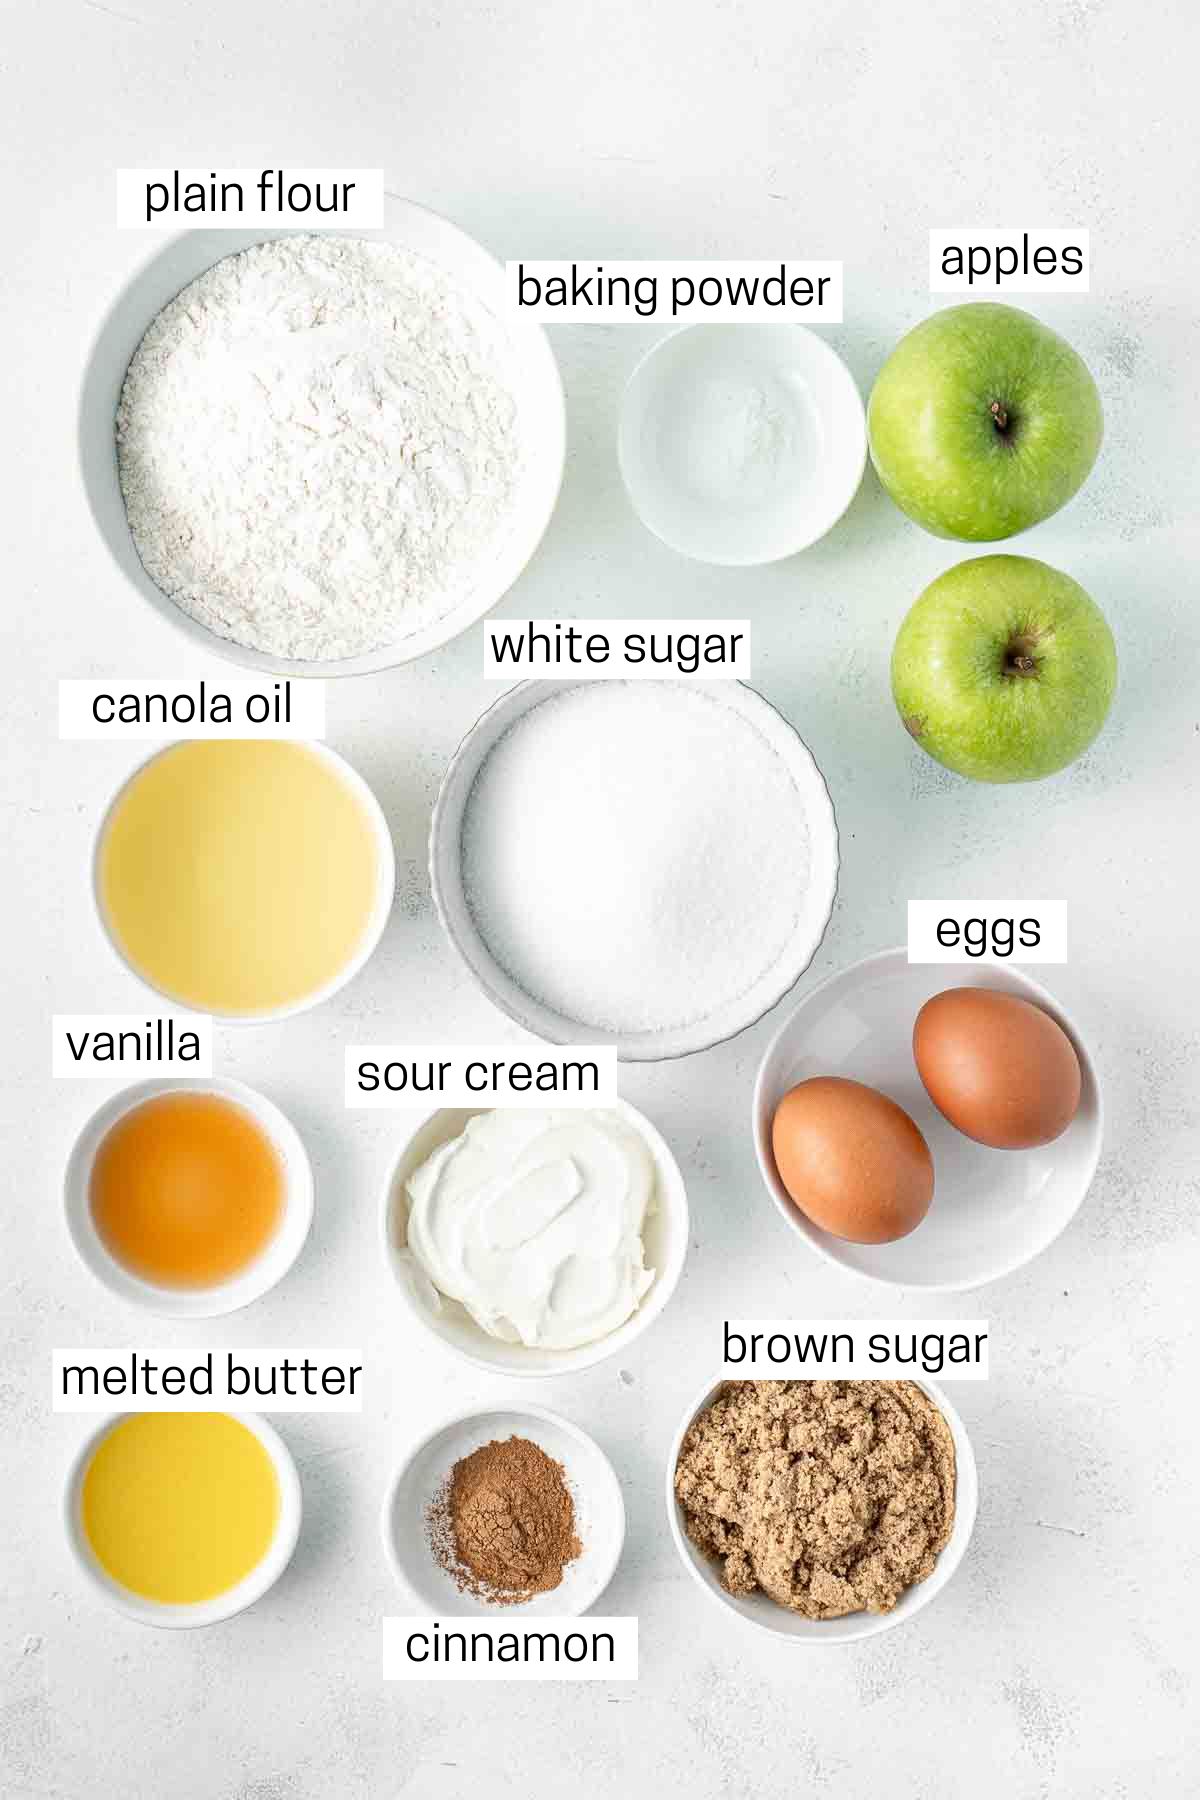 All ingredients needed to make cinnamon apple cake laid out in small bowls.